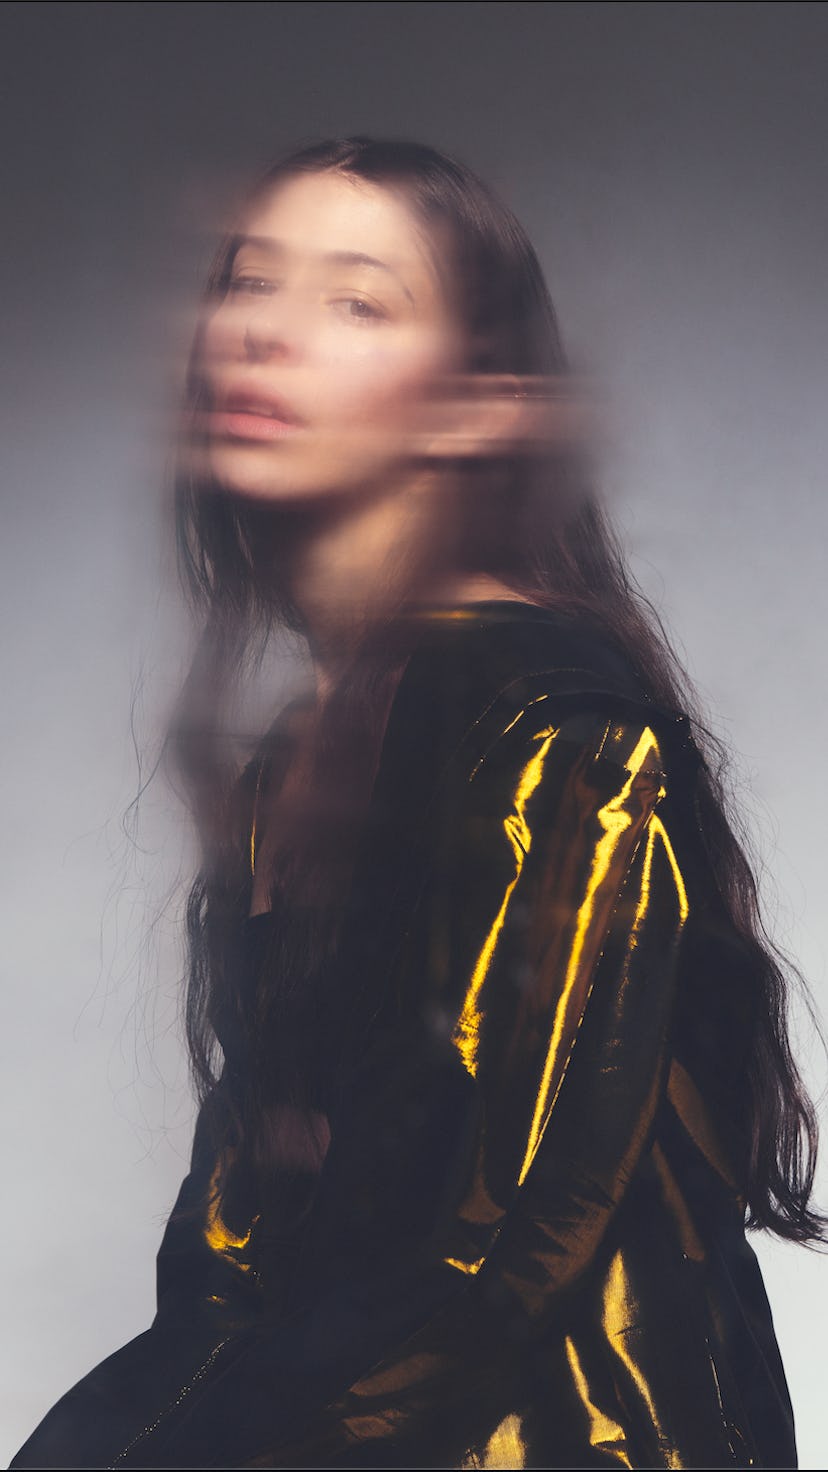 A blurry girl with a golden jacket